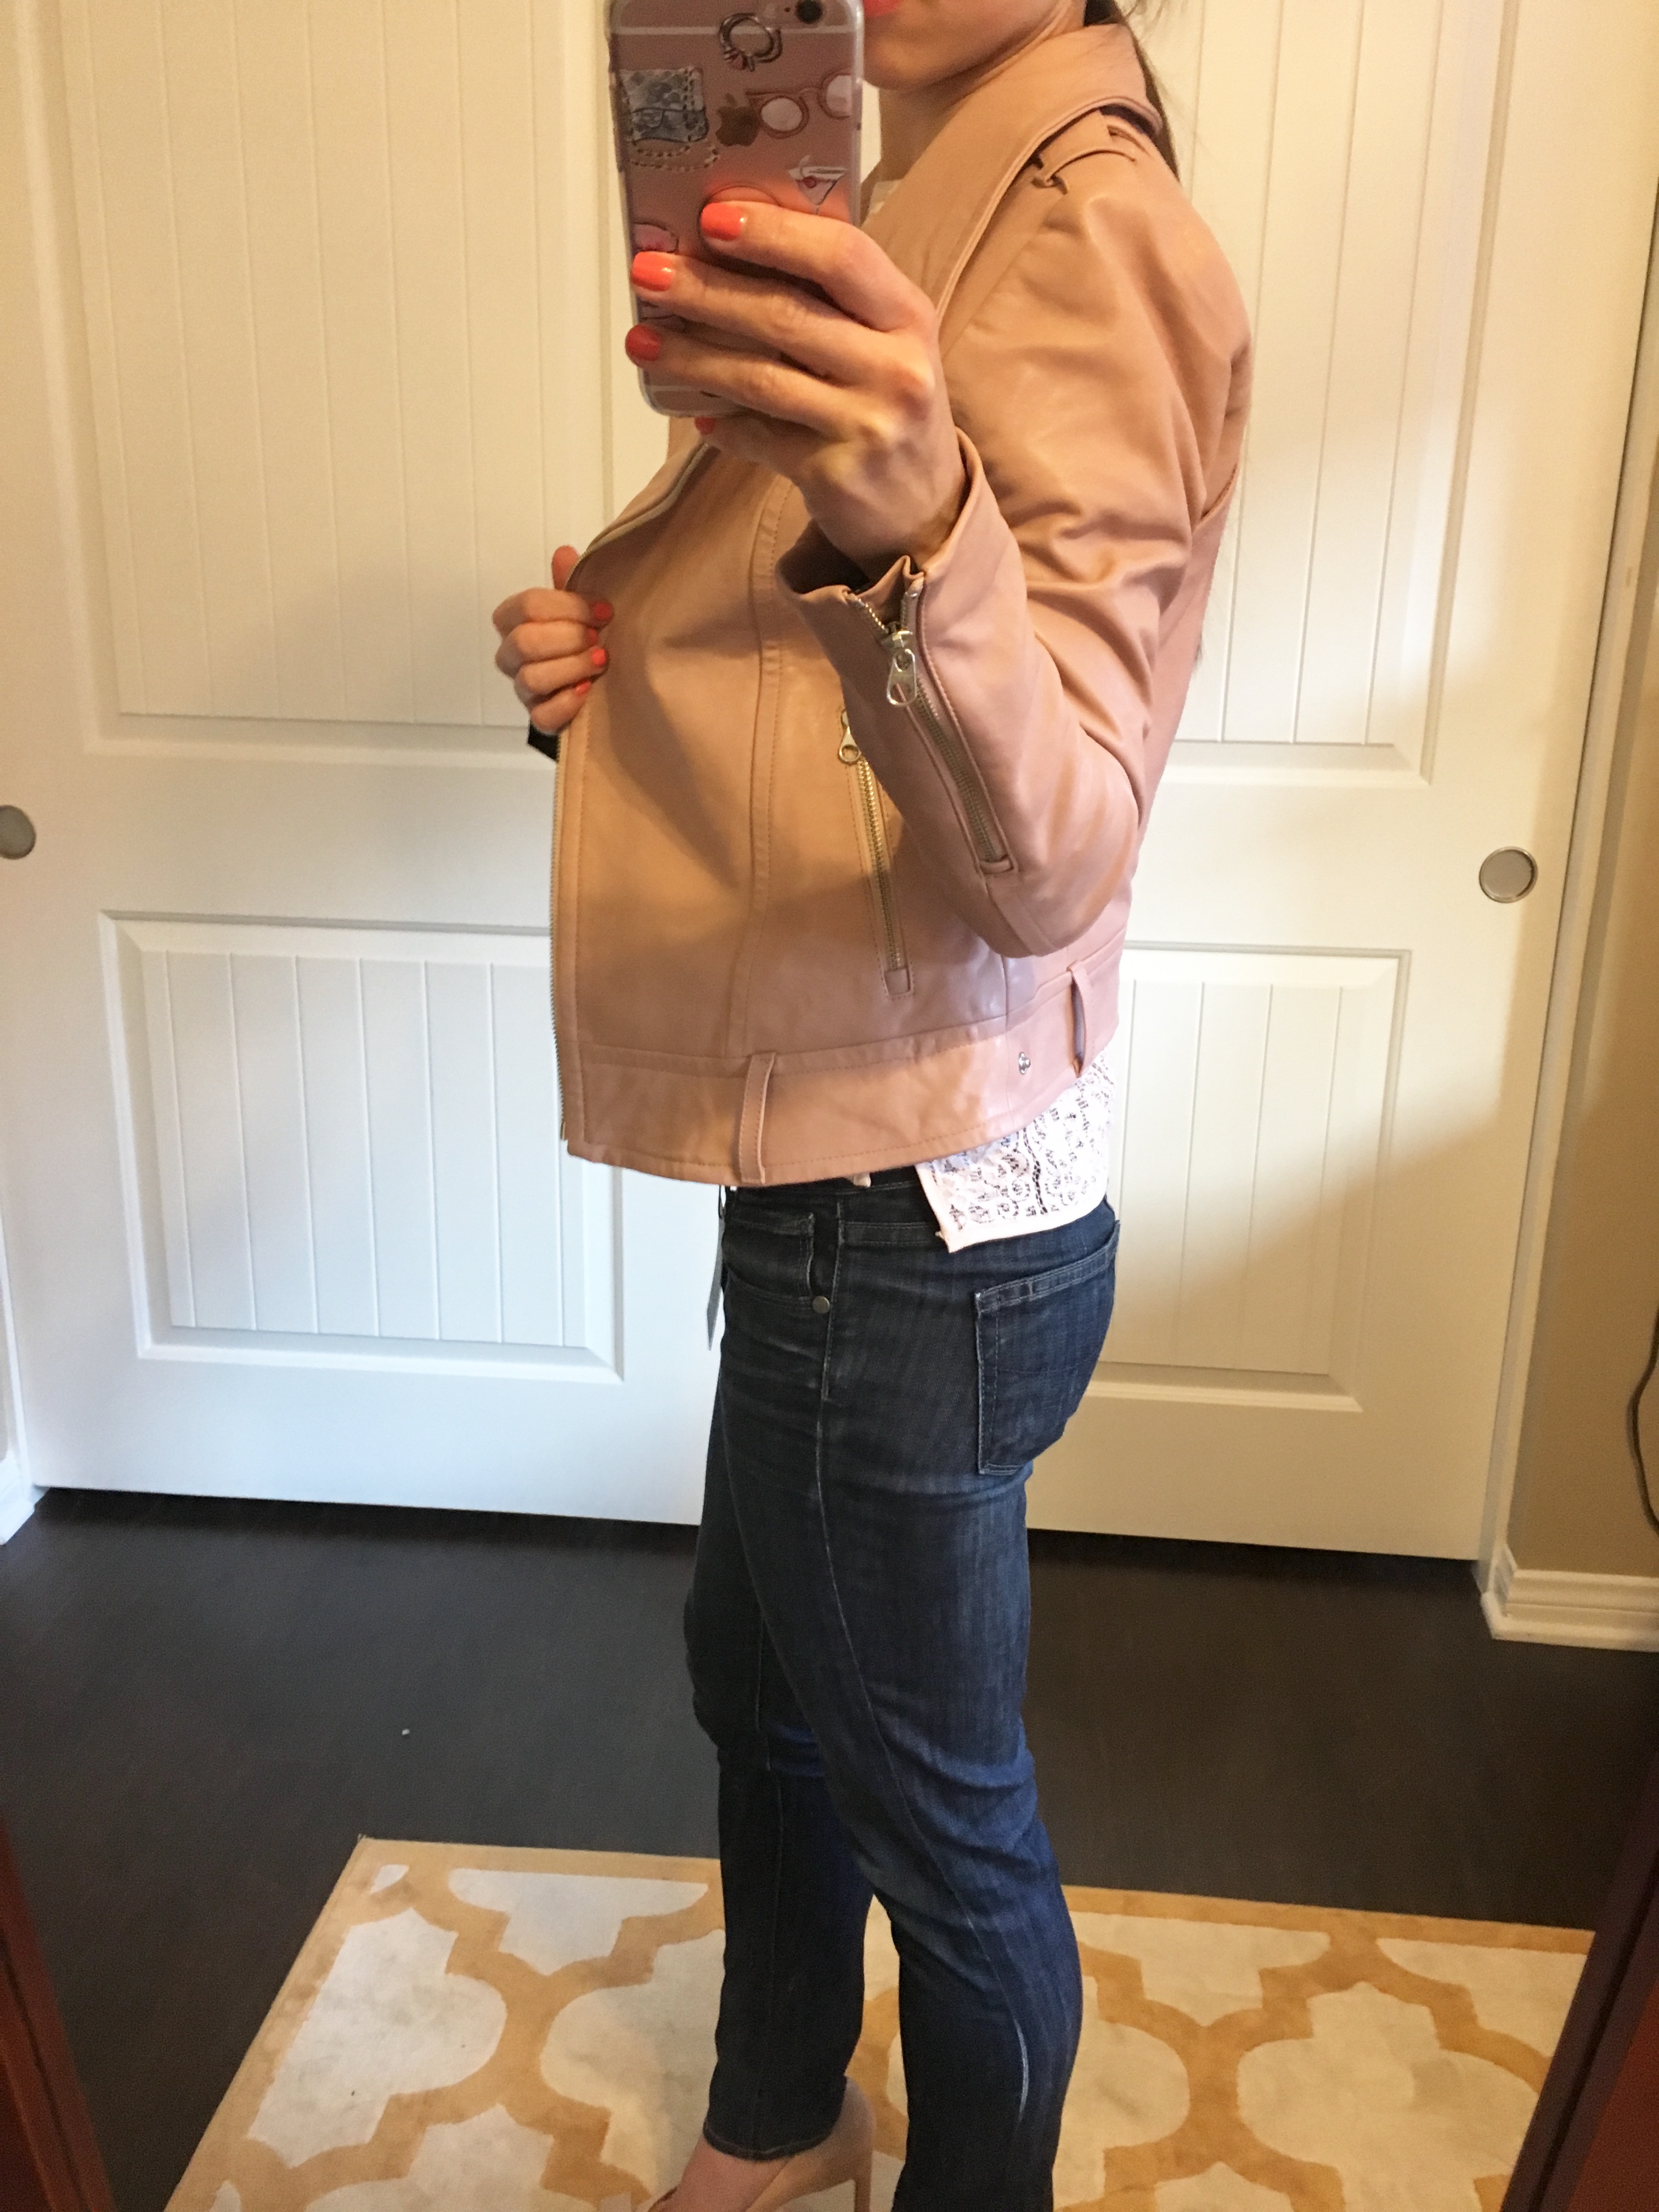 J. Crew Denim Jacket Review | Mackage Hania Moto Leather Jacket cognac and pink | Theory Gida Mini Skirt | Nordstrom Trouve Pleated Blazer | Banana Republic Scallop Blazer | Gibson Twist Front Cozy Fleece Pullover | Caslon Fringed Tee | Petite fashion and style